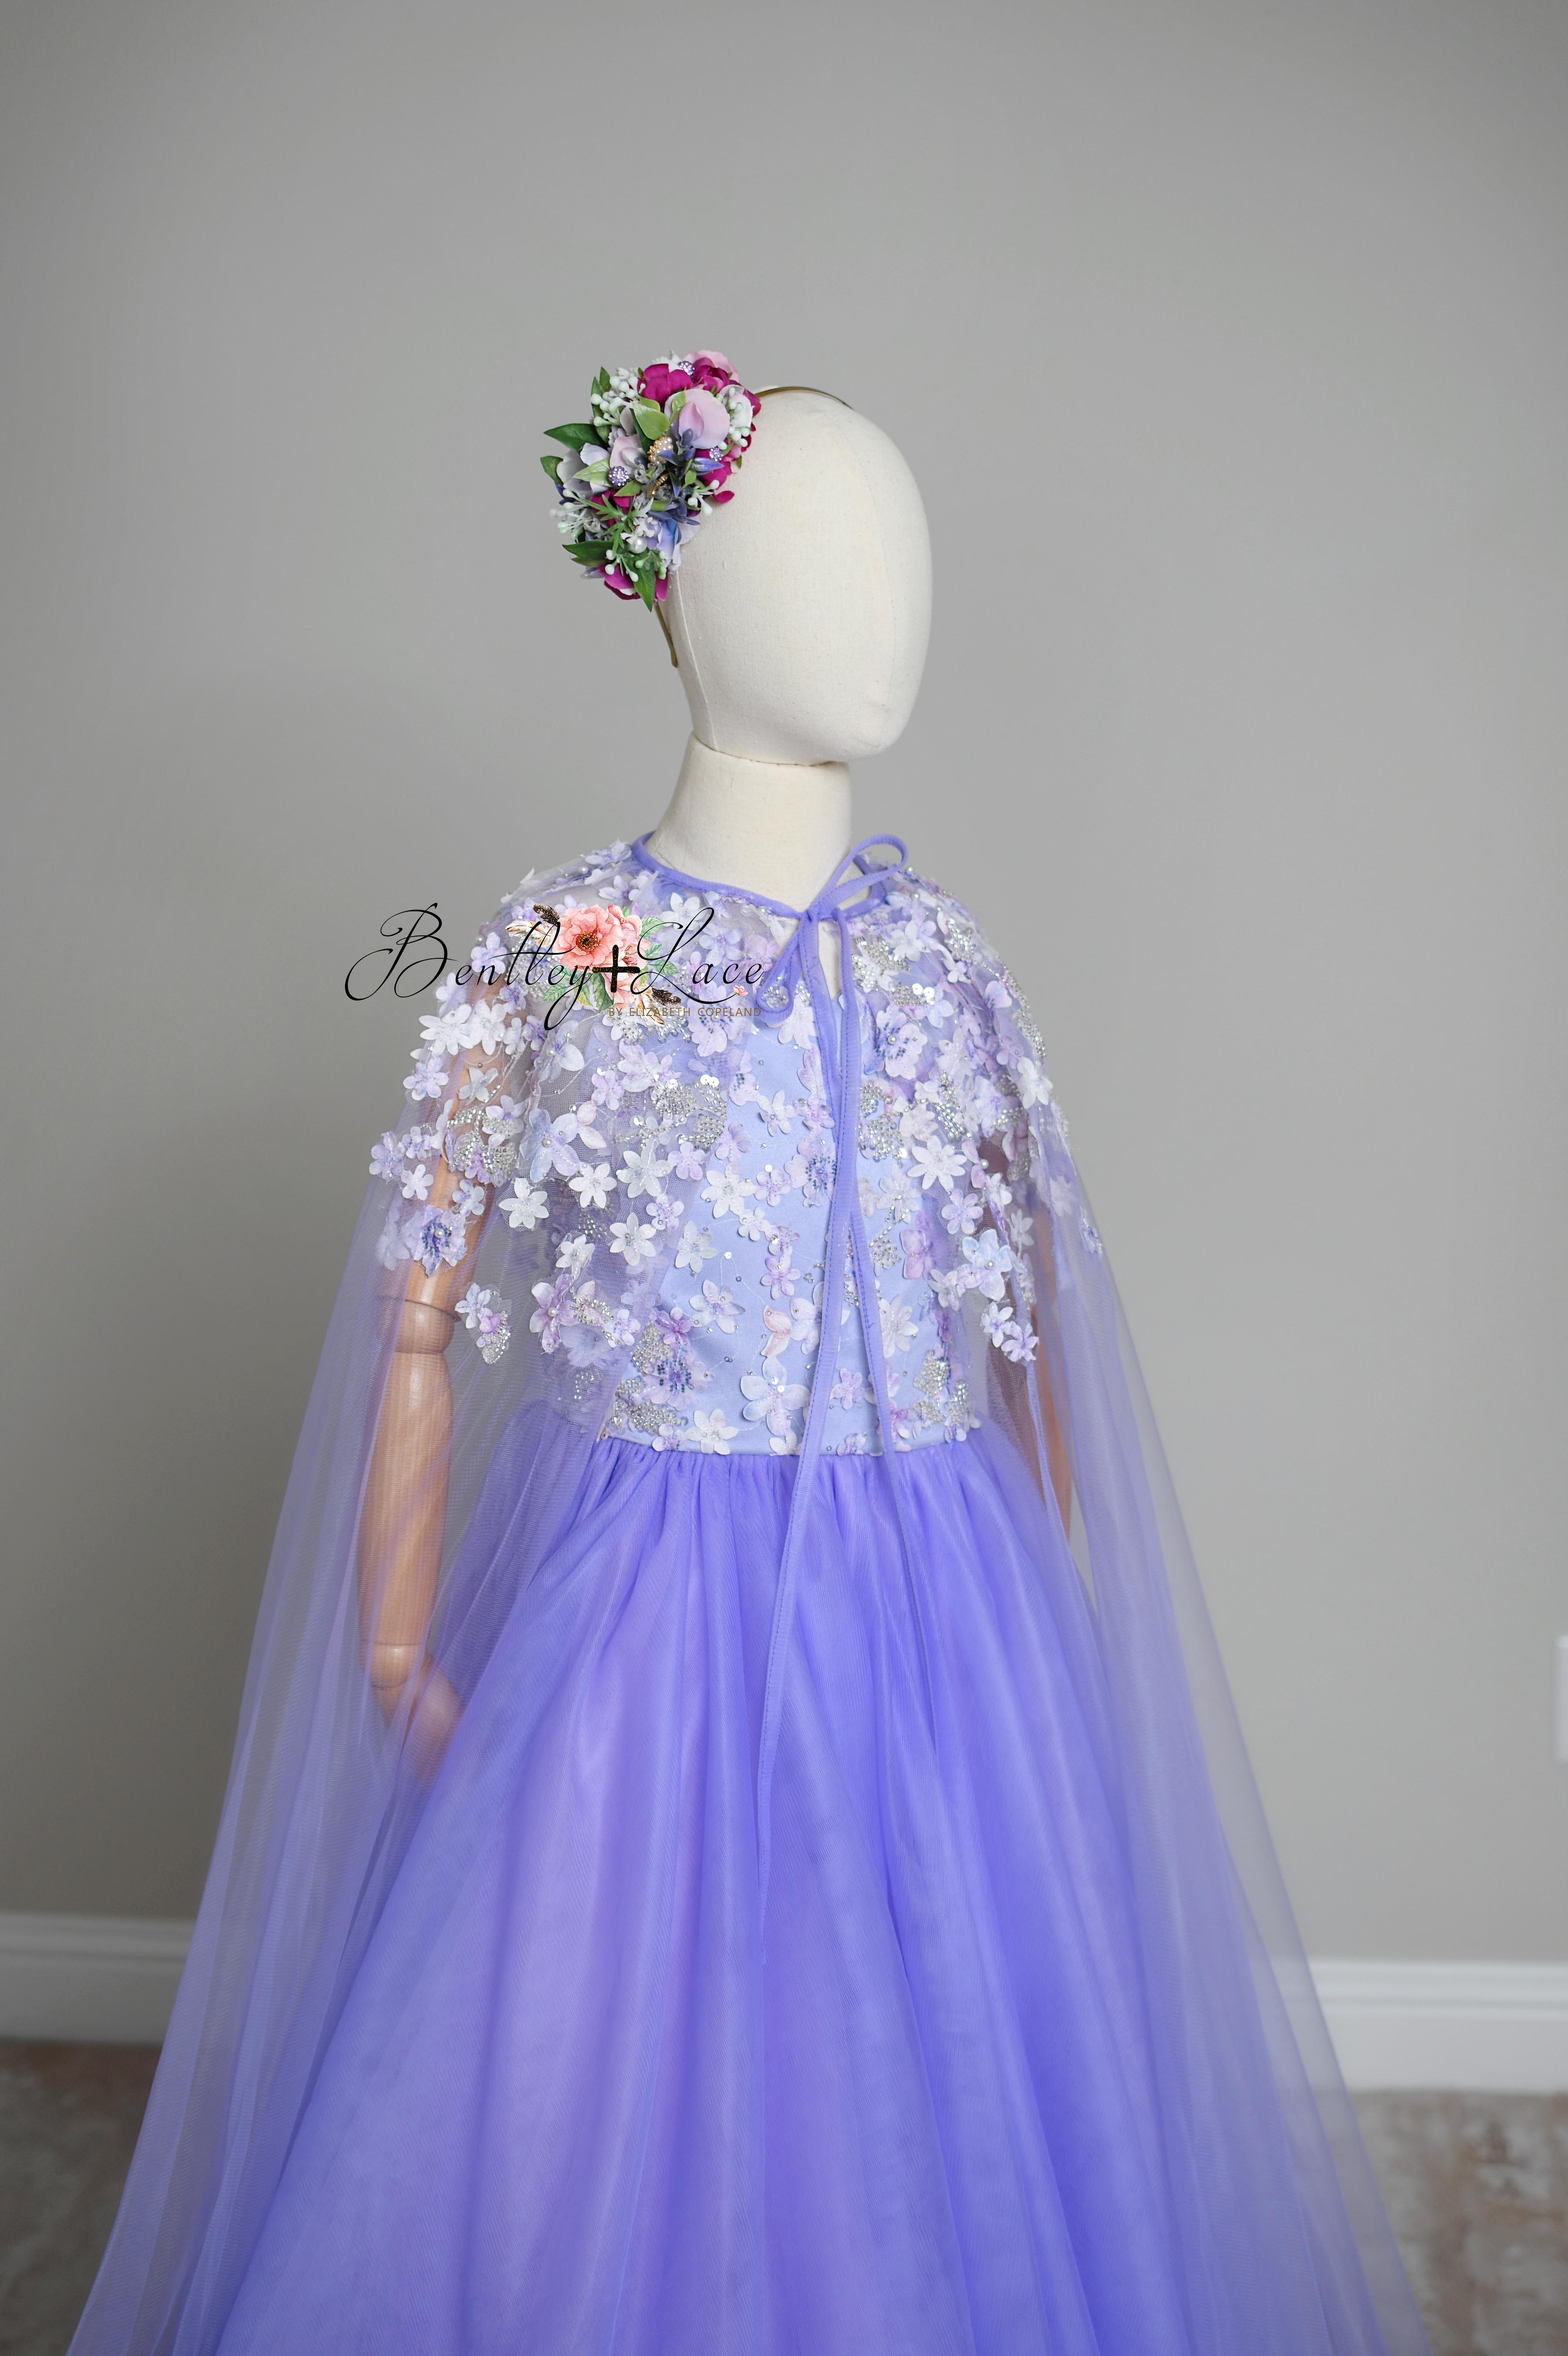 Fabric and Tulle Cape  - Custom color / fabric options available